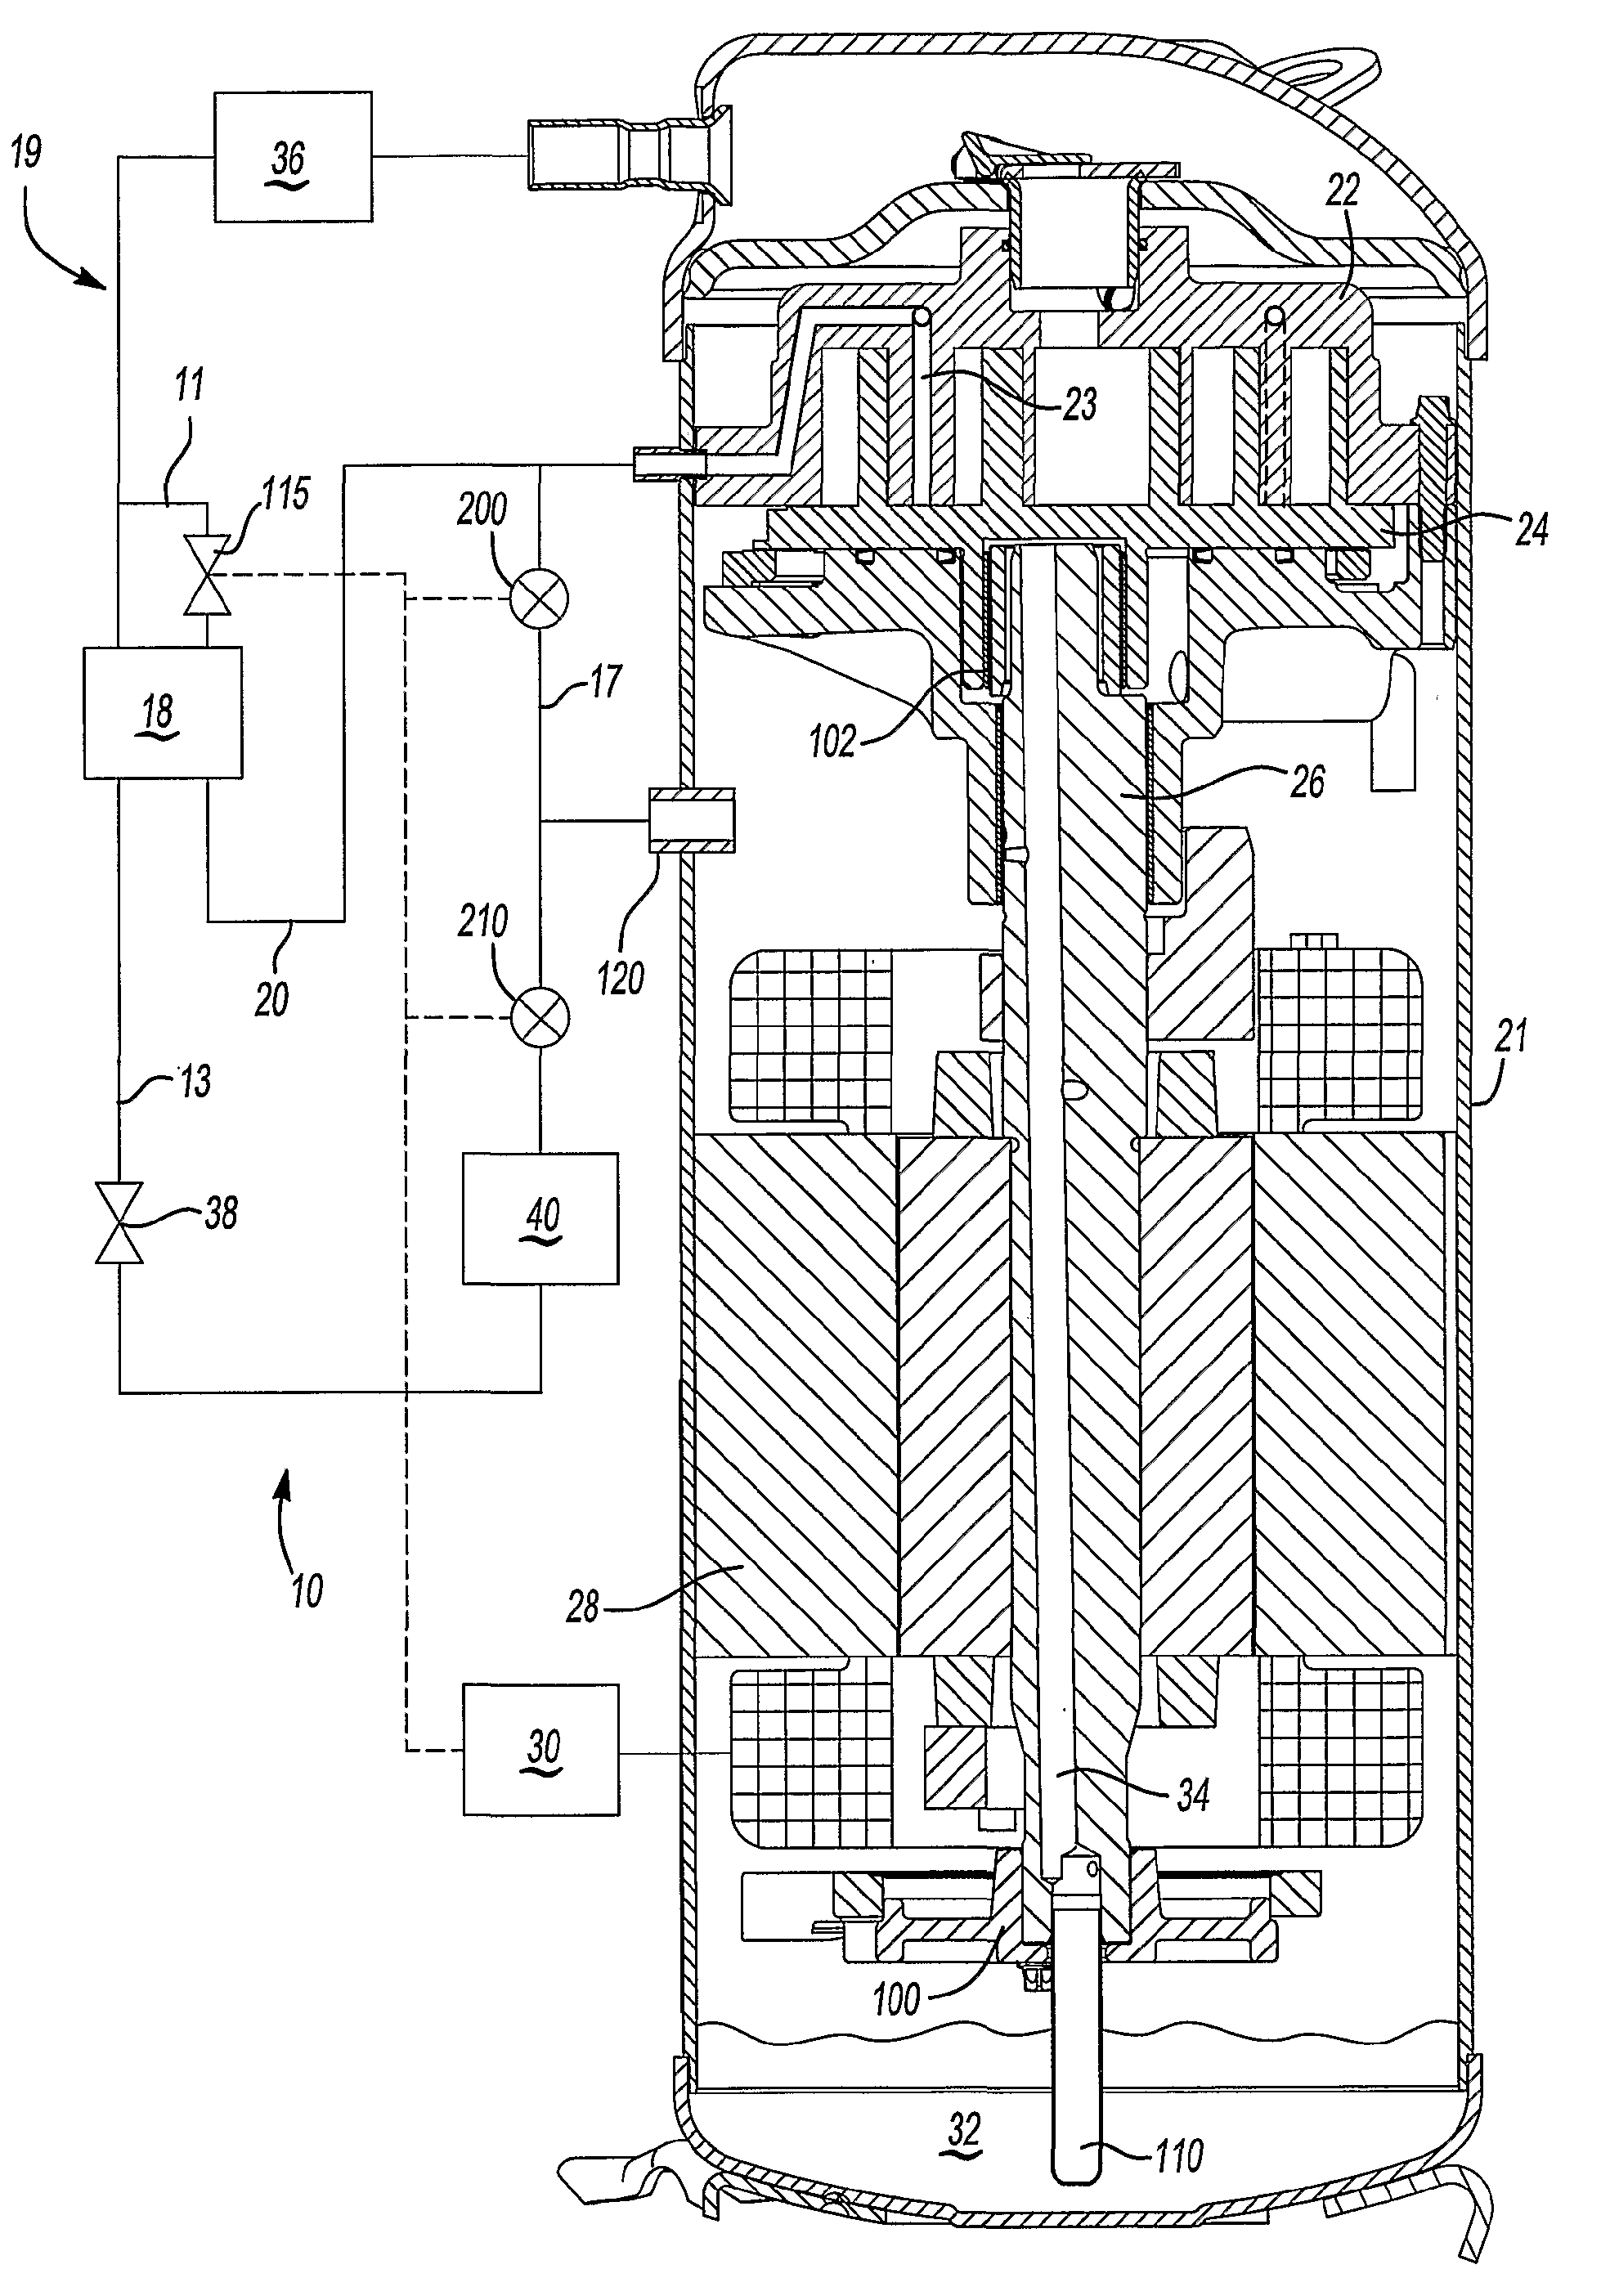 Refrigerant System with Pulse Width Modulated Components and Variable Speed Compressor